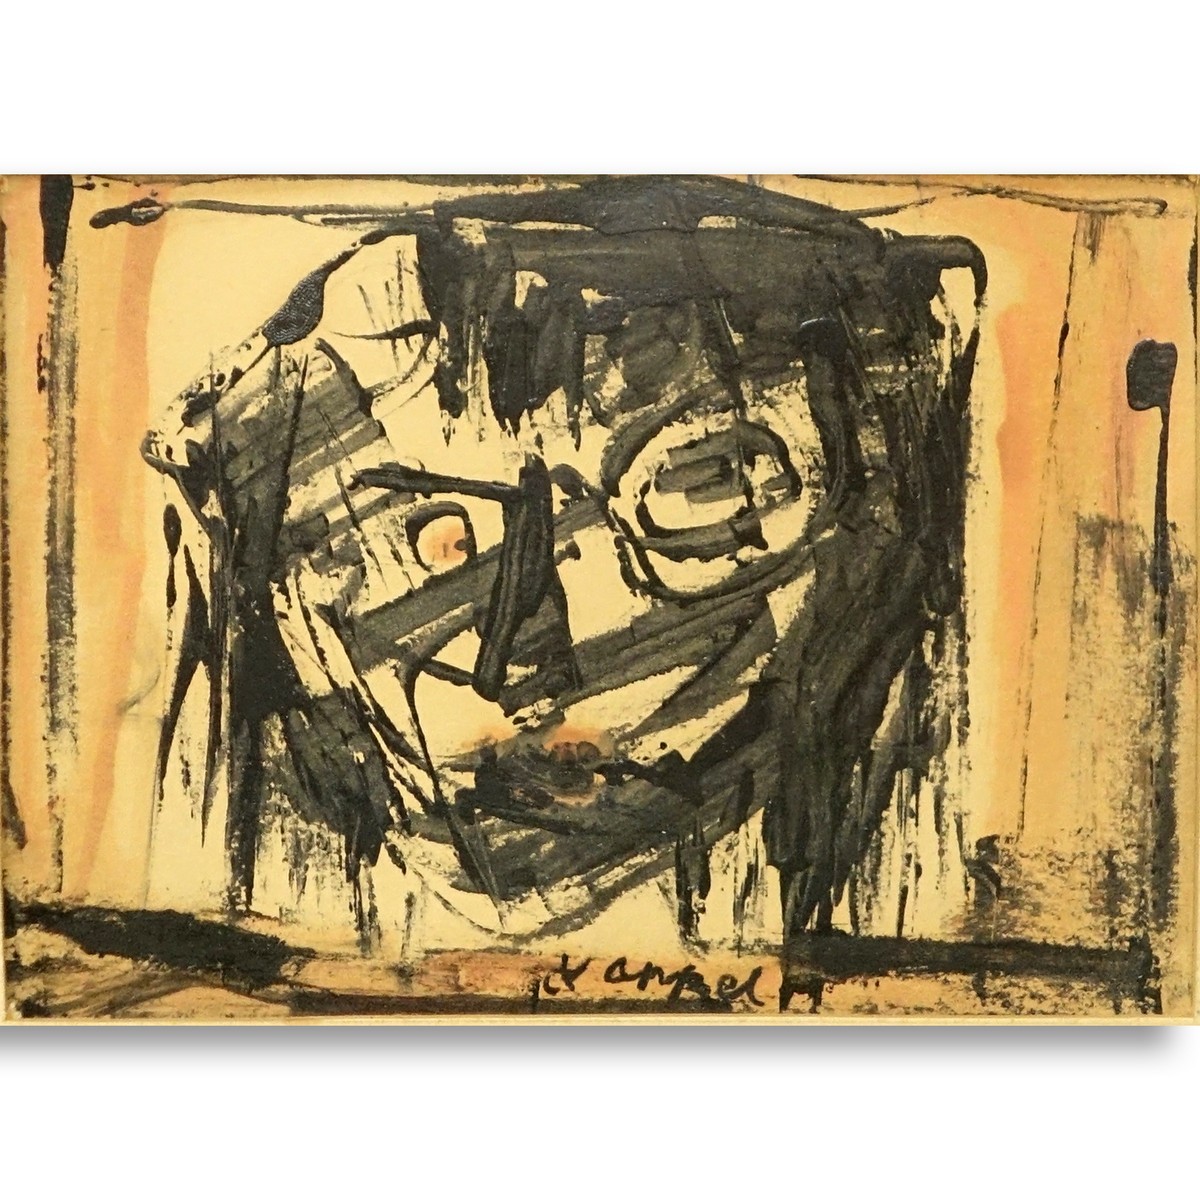 Karel Christiaan Appel, American (1921 - 2006) Ink and watercolor on paper "Head" Signed Lower center. Possibly 1950.